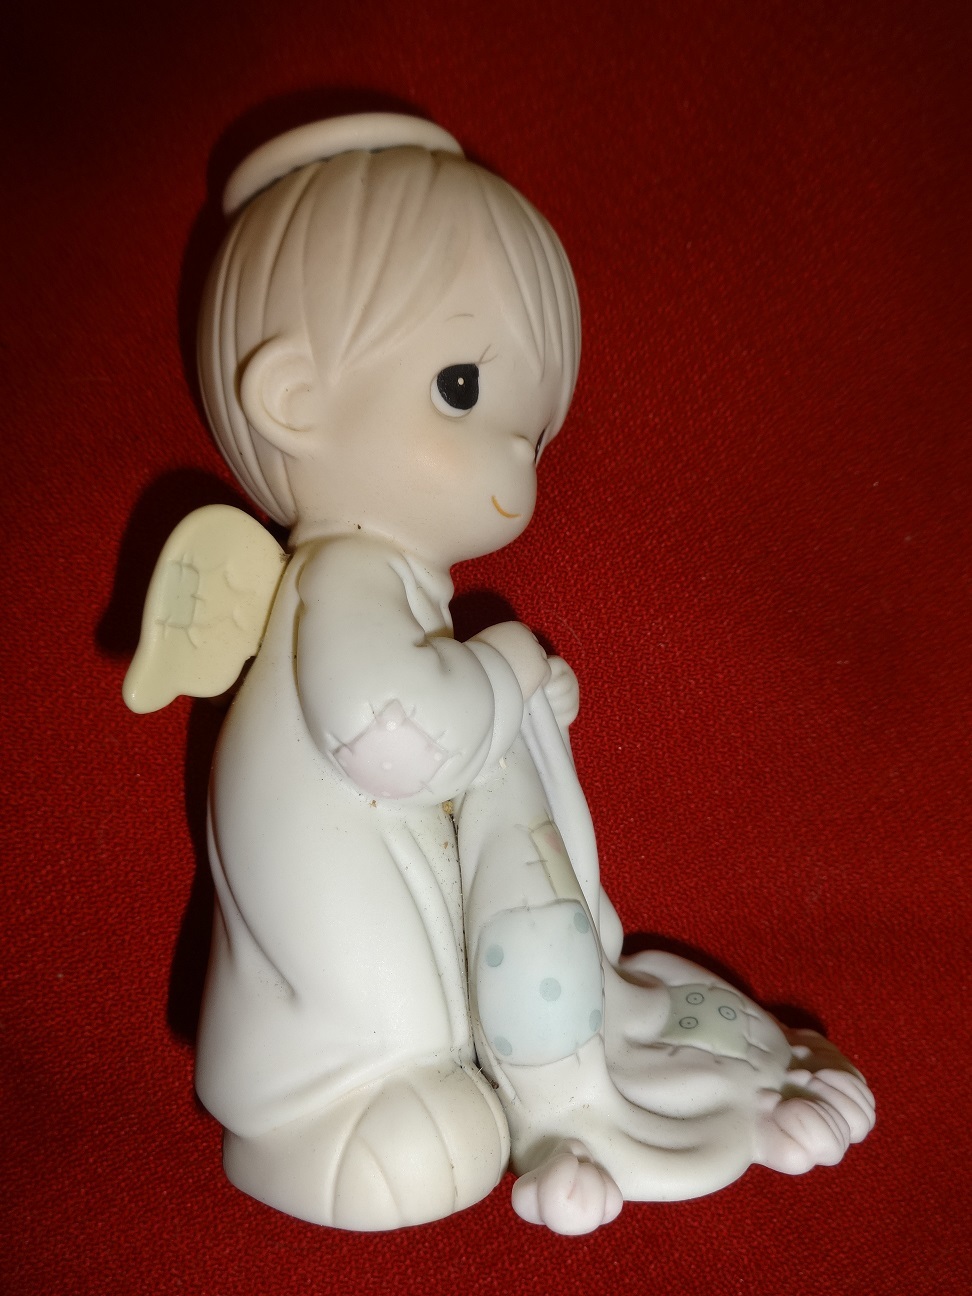 Primary image for Precious Moments WISHING YOU A COMFY CHRISTMAS figurine angel